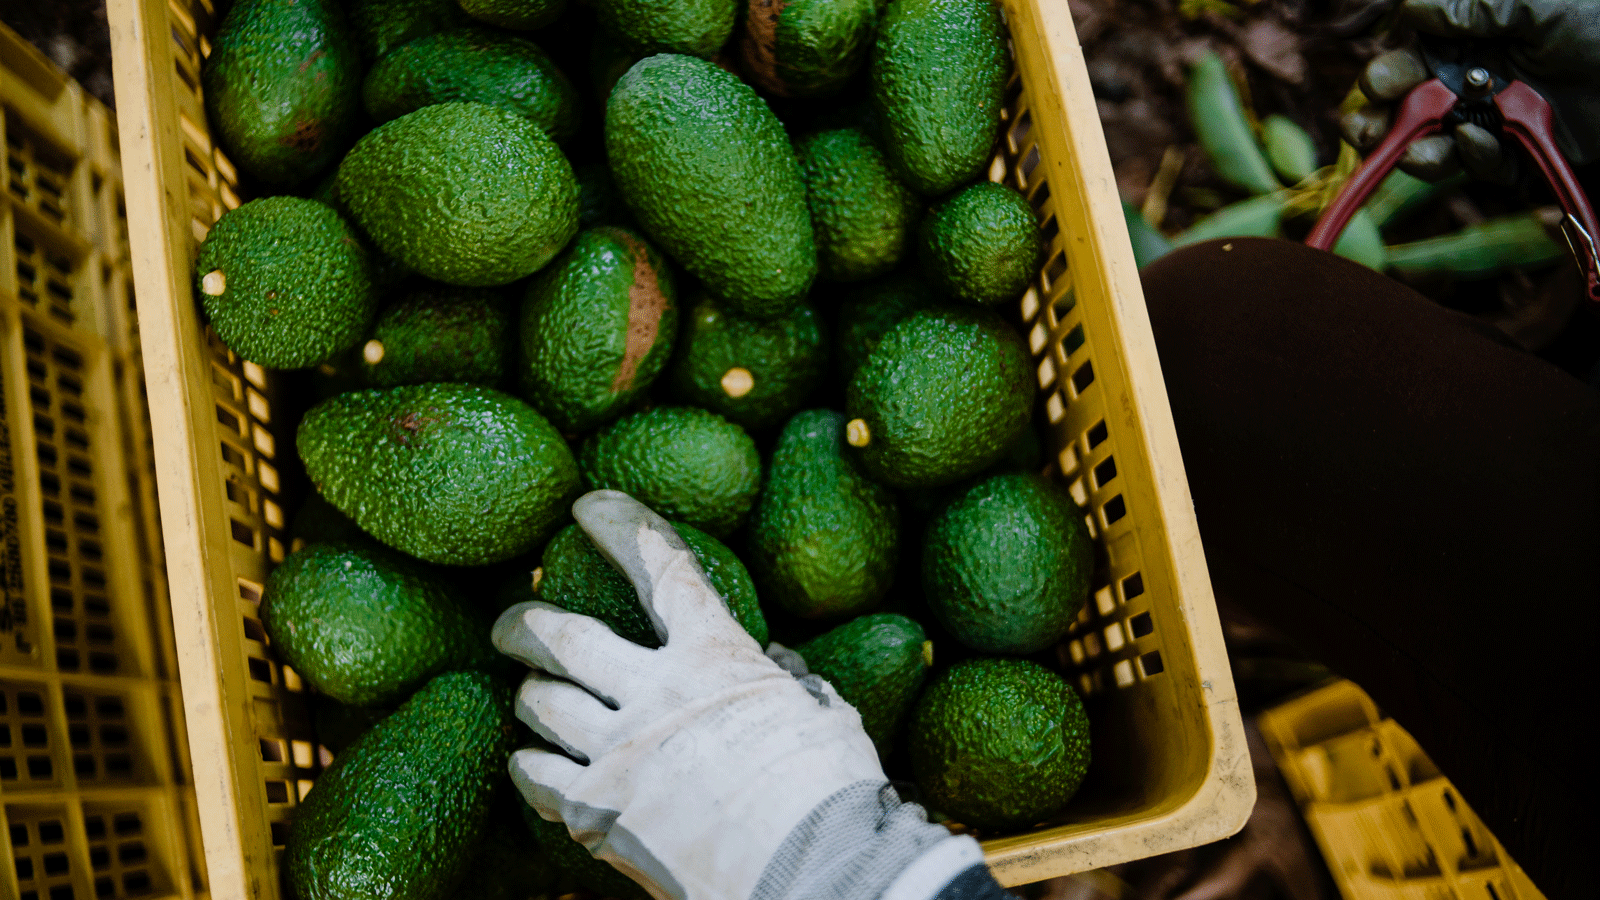 Avocado harvests face major declines as climate change hits growing regions